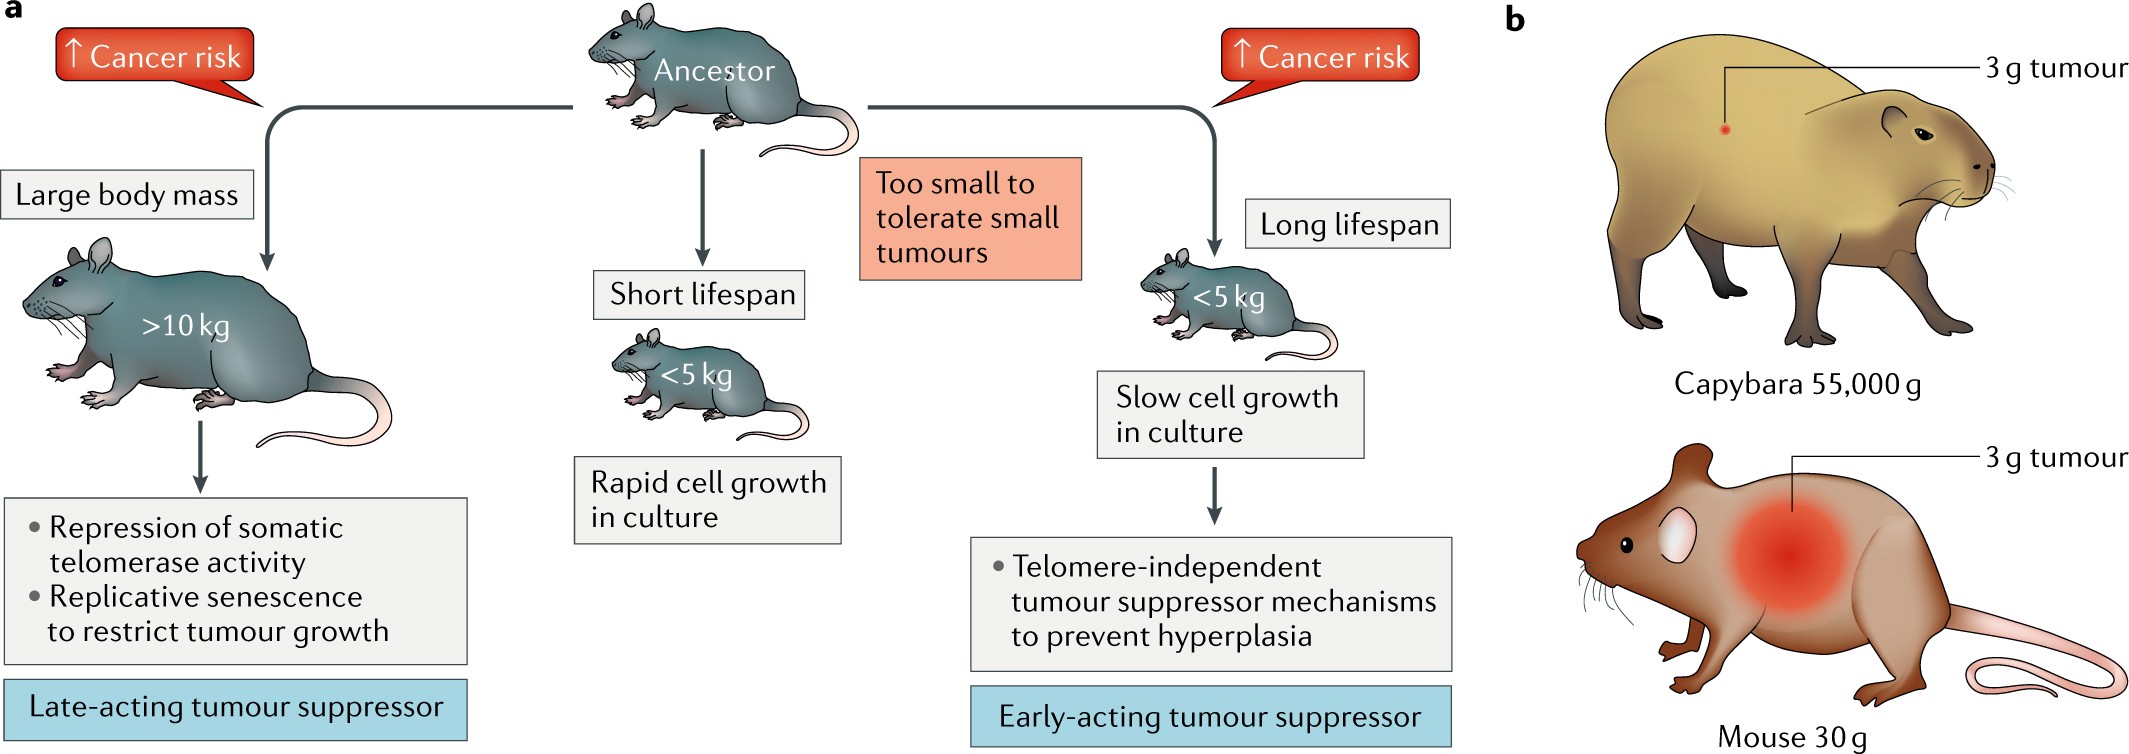 Mechanisms of cancer resistance in long-lived mammals | Nature Reviews  Cancer